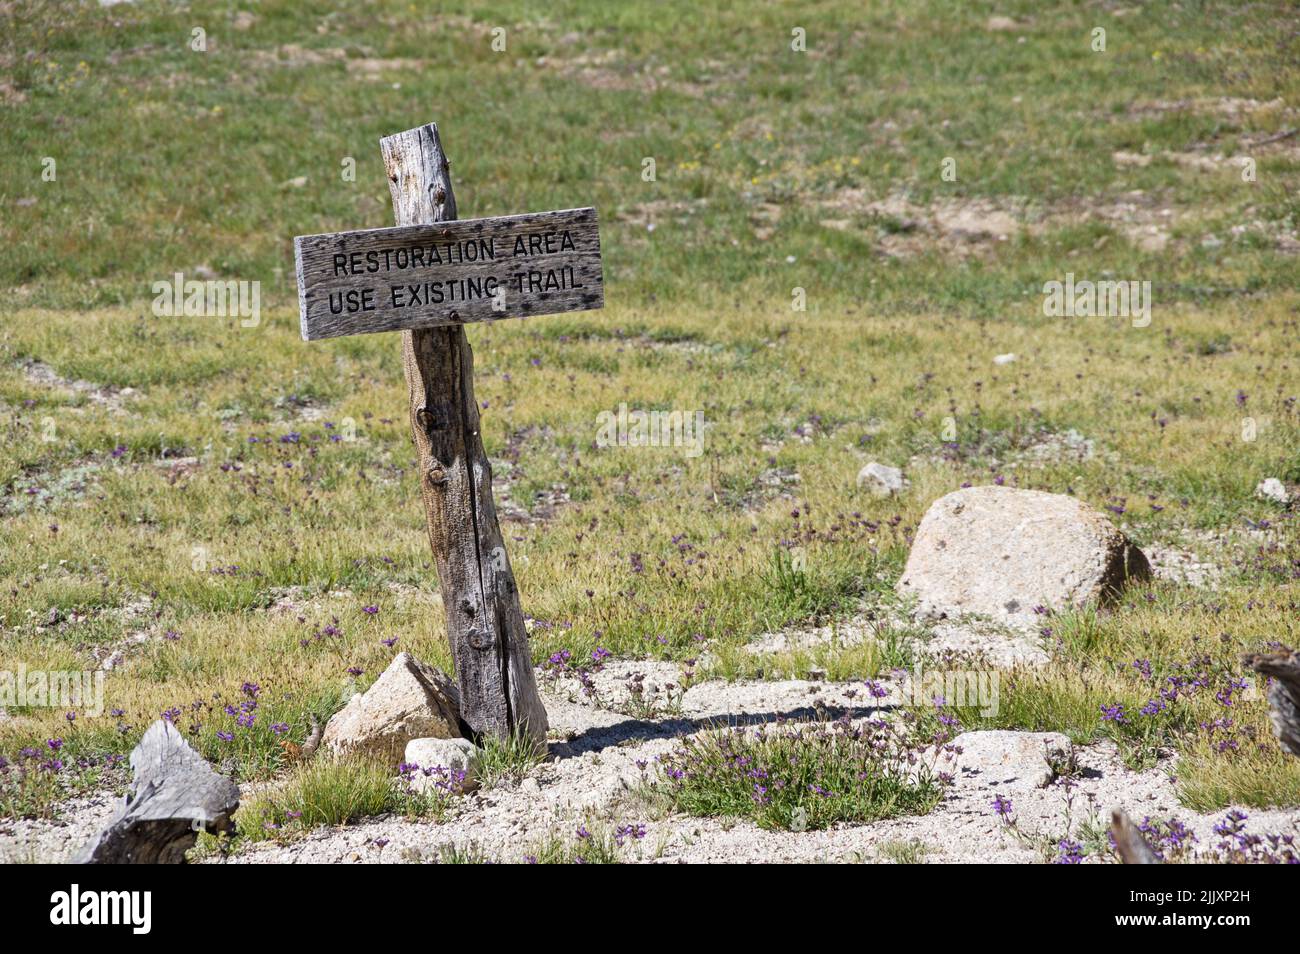 restoration area use existing trail sign on the side of a Sierra meadow Stock Photo